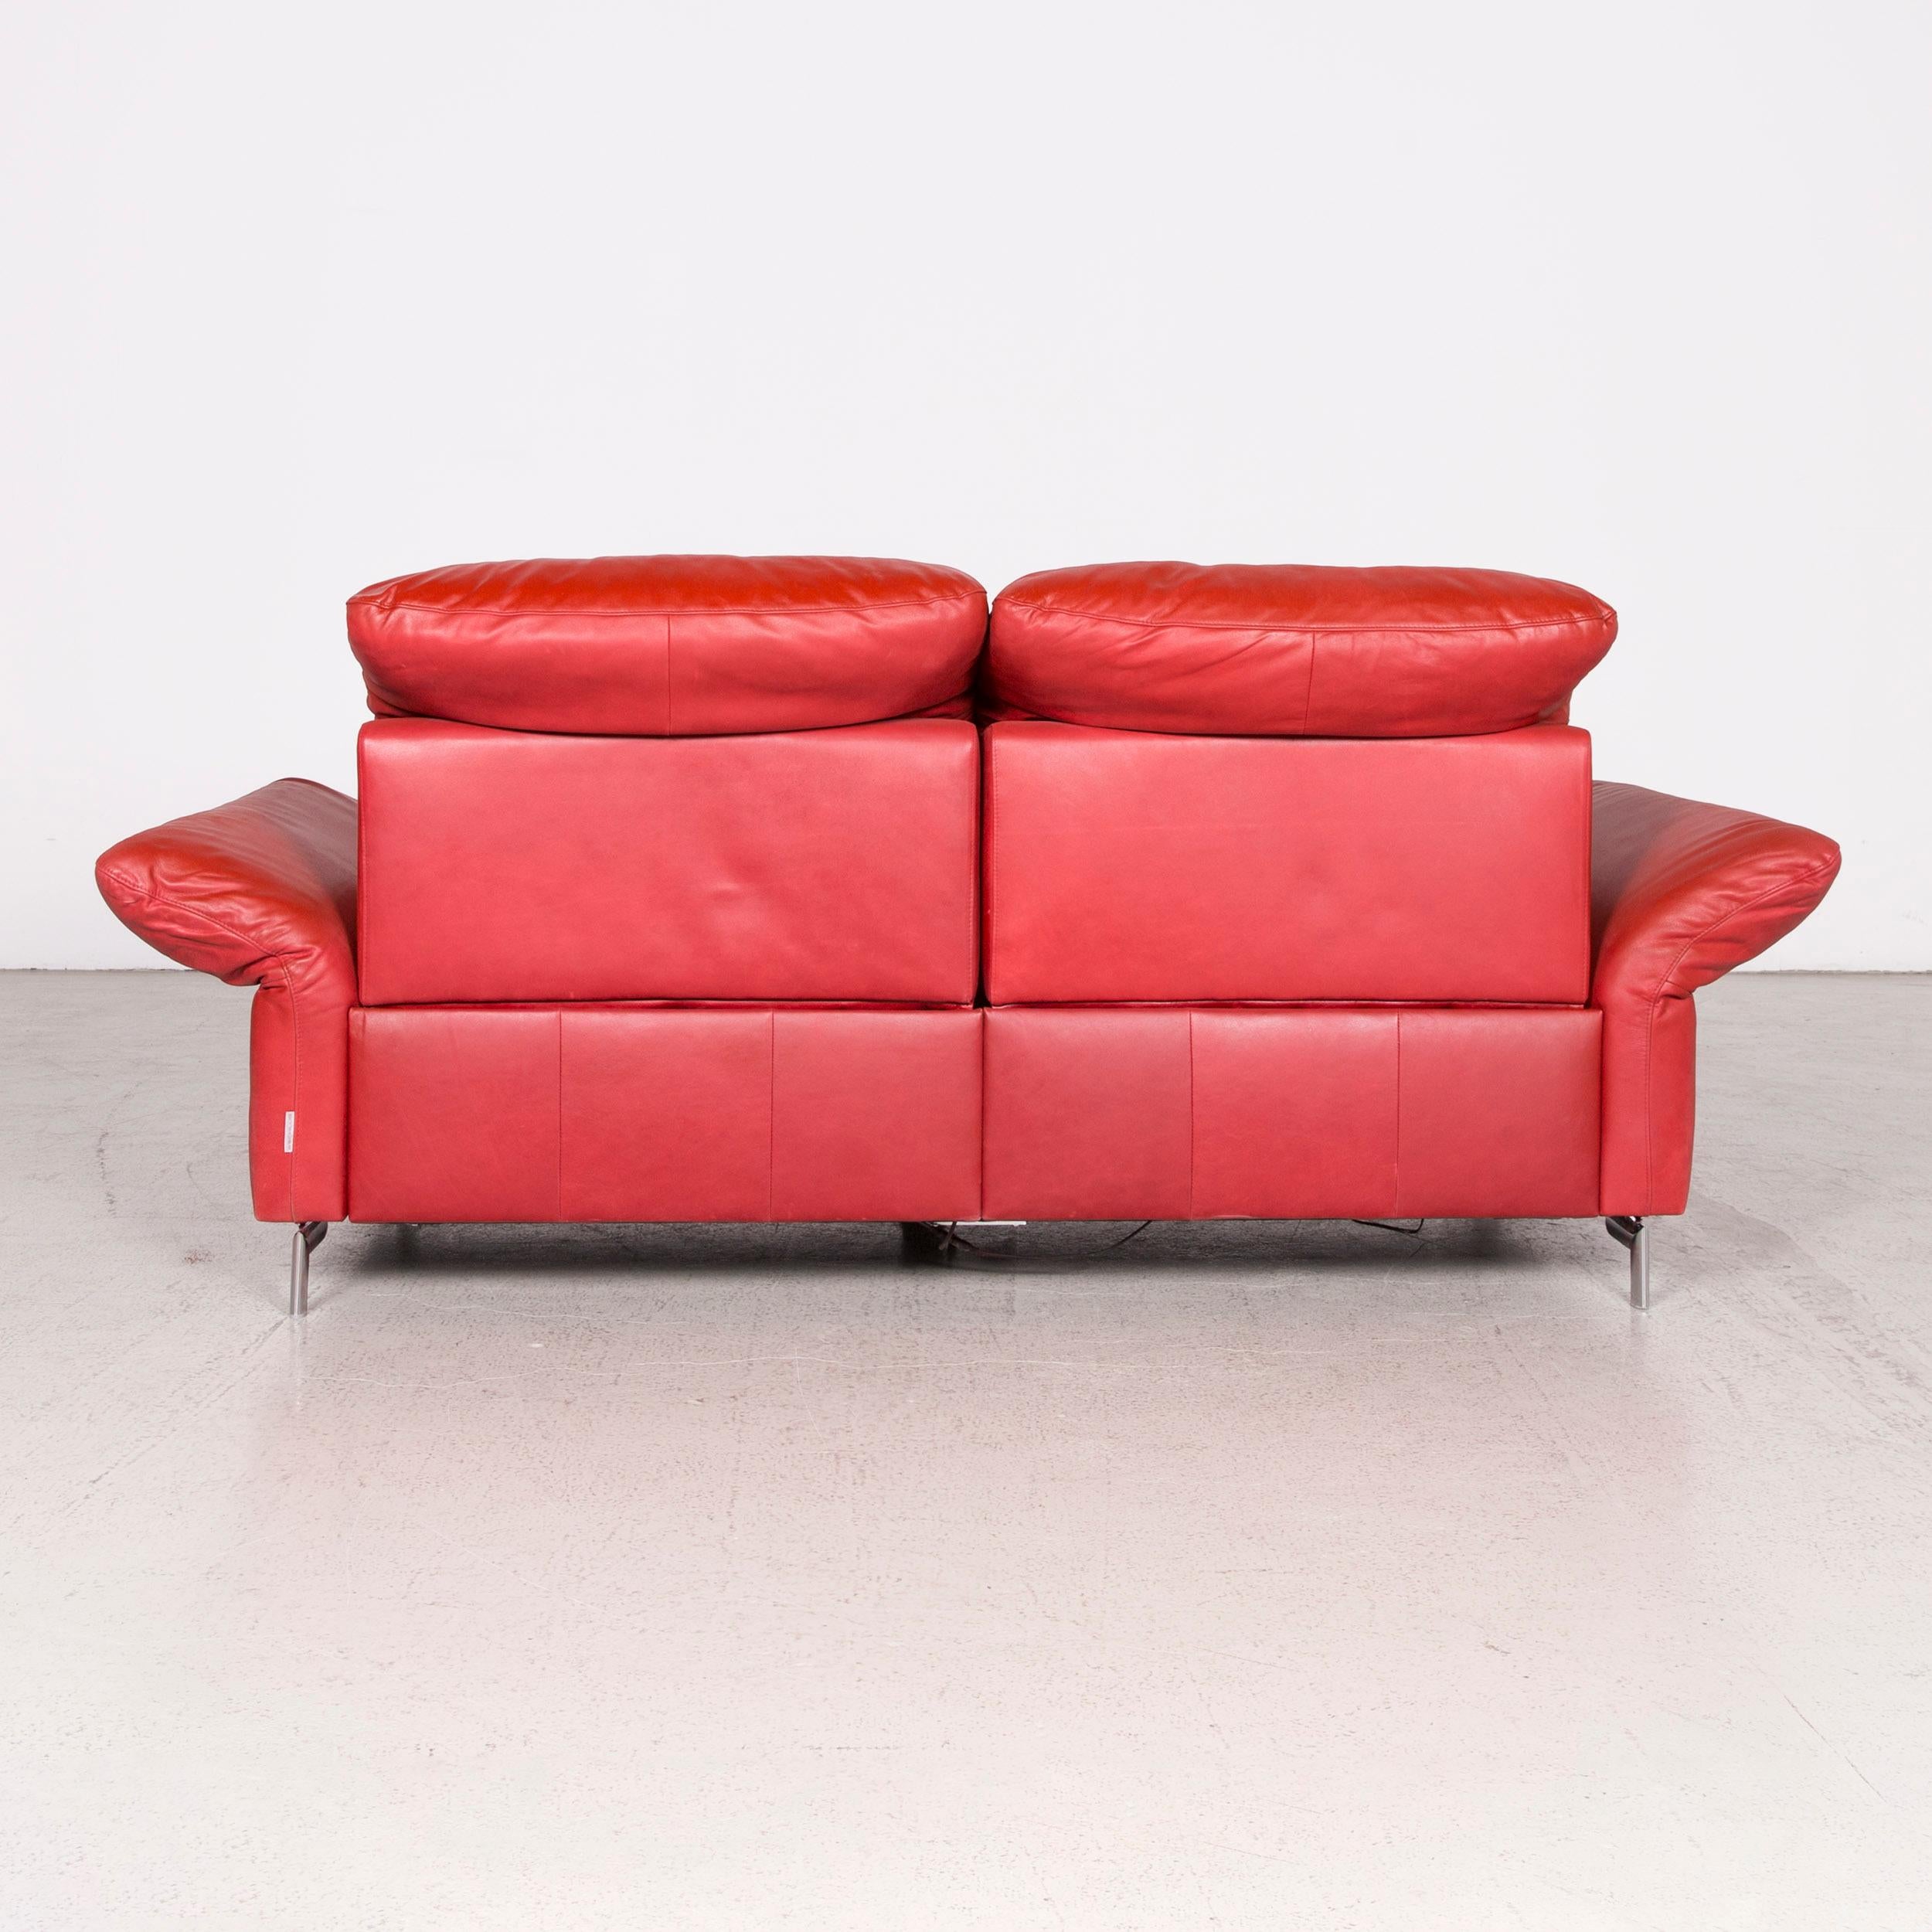 Willi Schillig Siena Designer Leather Sofa Red Real Leather Dreisityer Couch For Sale 5